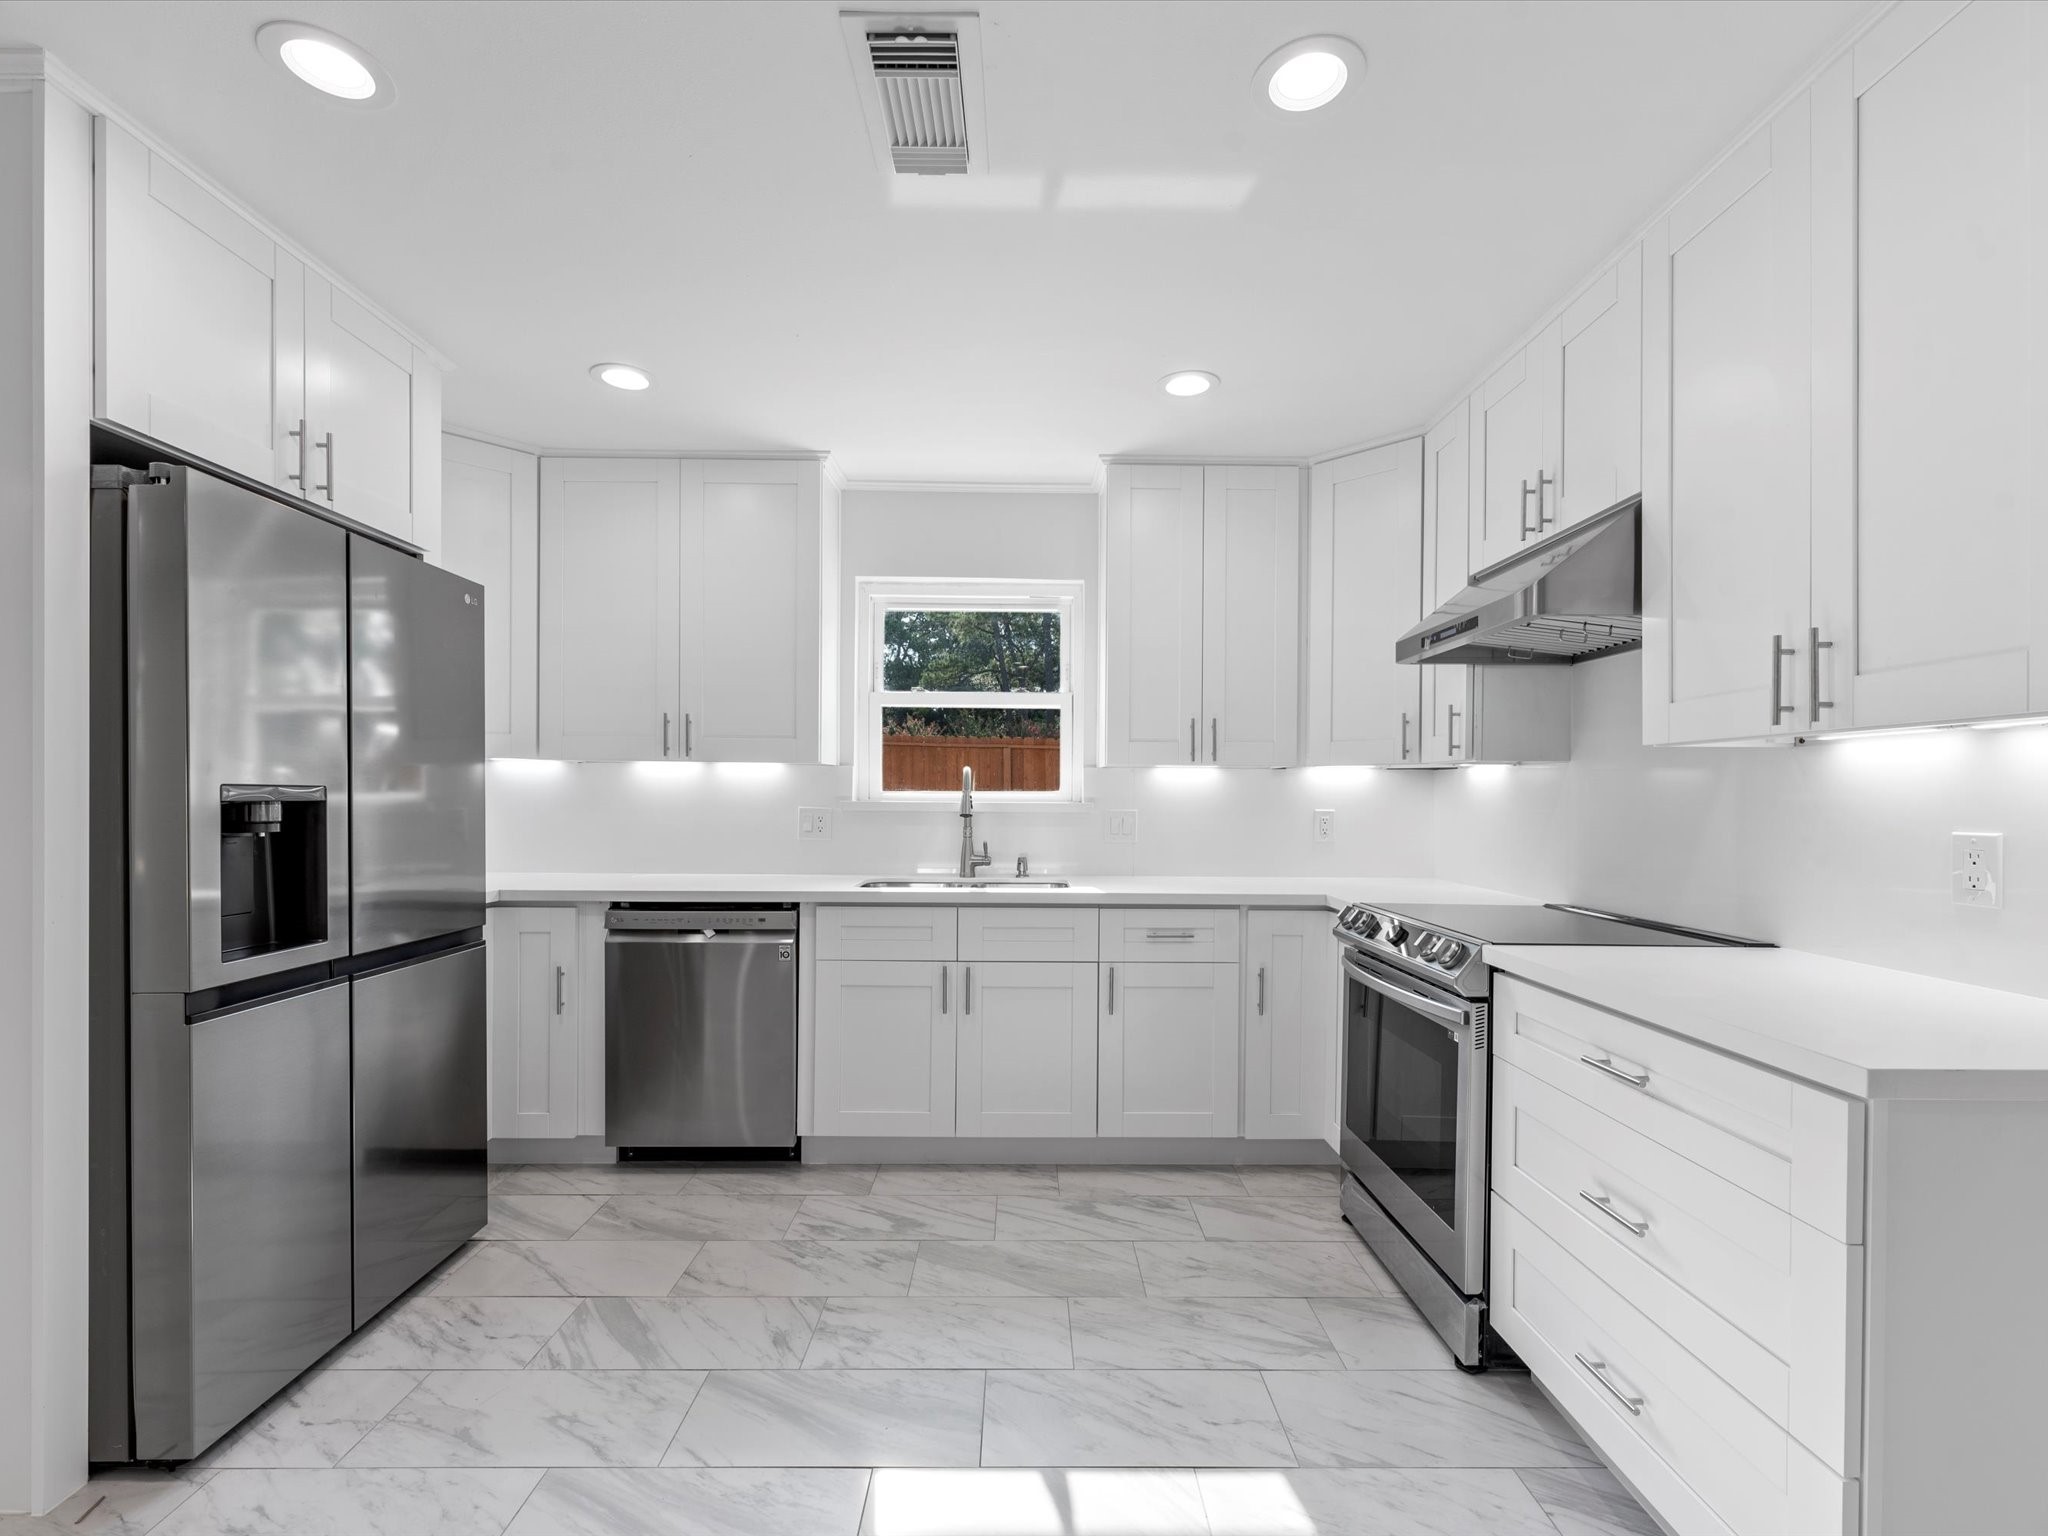 Interior features and finishes include all brand new tile floors, quartz countertops, stainless steel appliances and fresh paint all throughout.